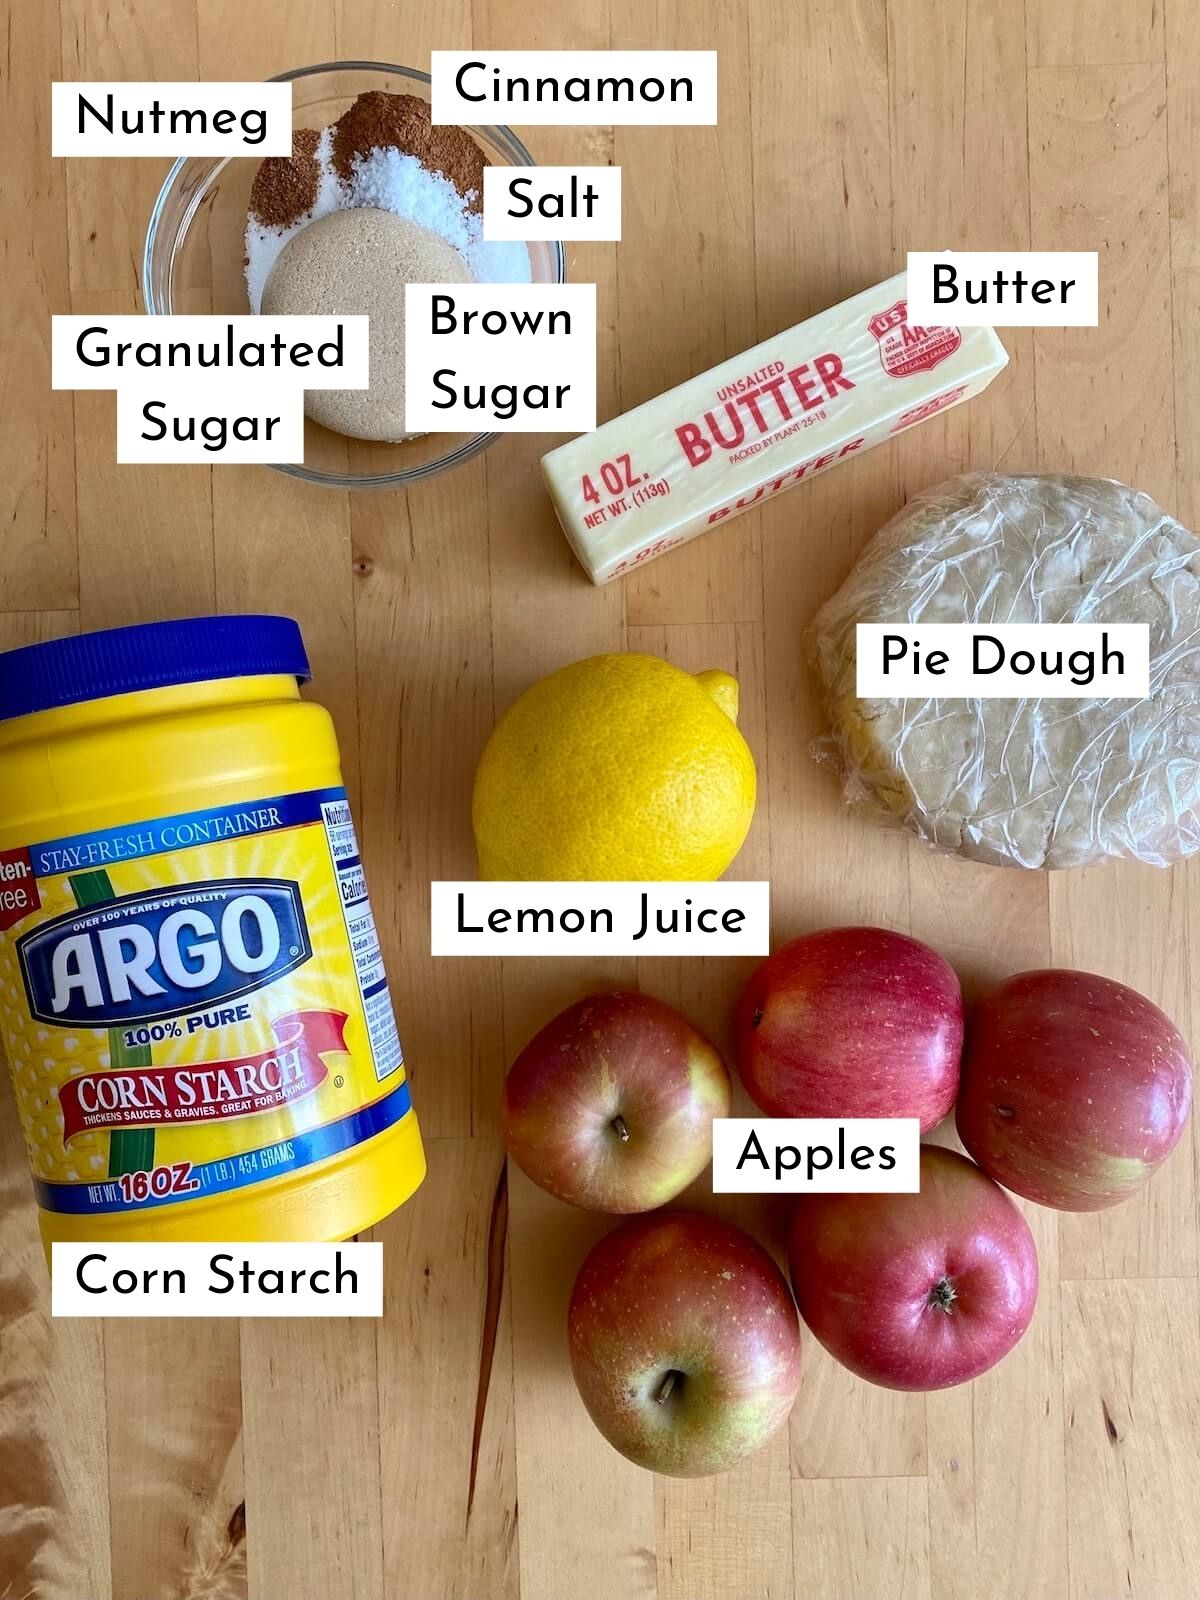 The ingredients to make deconstructed apple pie displayed on a butcher block countertop. The ingredients are labeled with text stating what each ingredient is. The ingredients include apples, pie dough, butter, brown sugar, granulated sugar, cinnamon, nutmeg, salt, lemon juice, and corn starch.